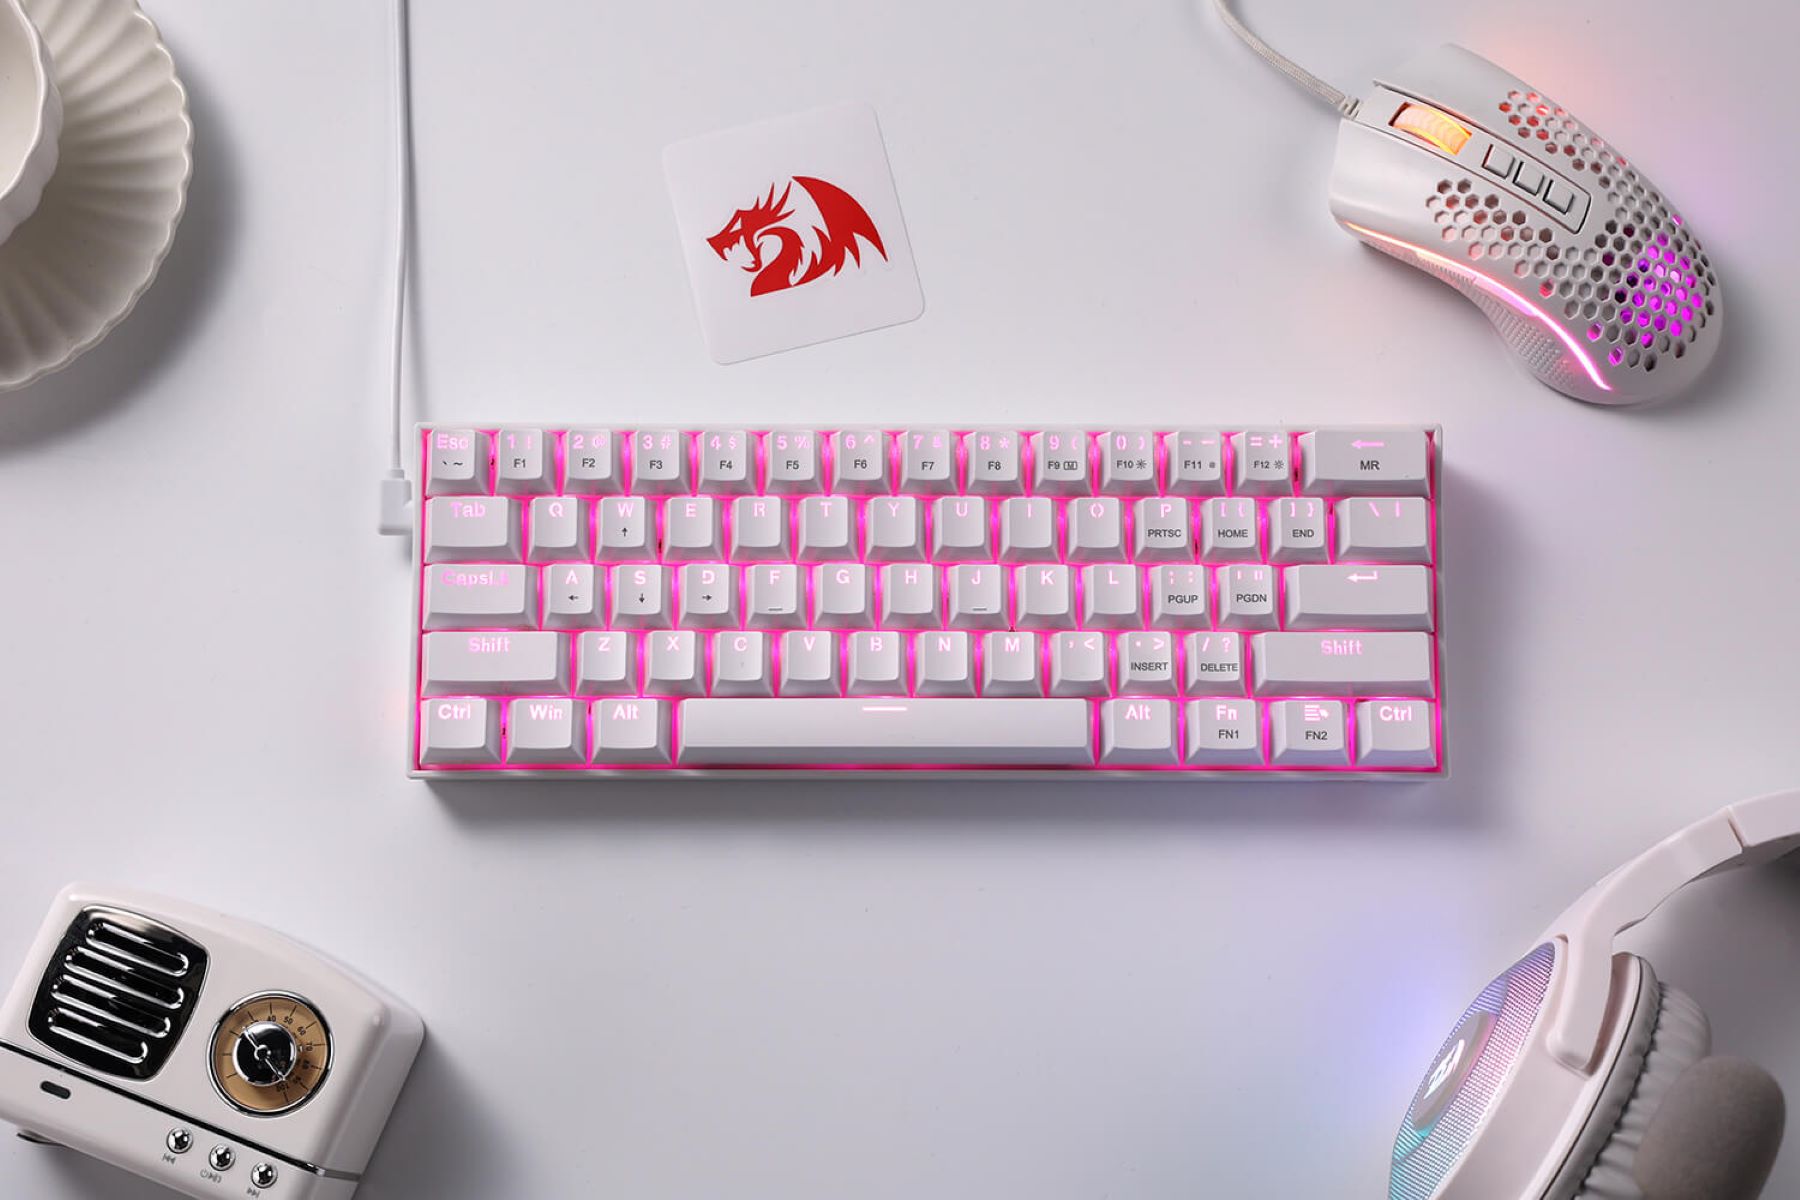 12 Best Red Dragon Mechanical Keyboard for 2023